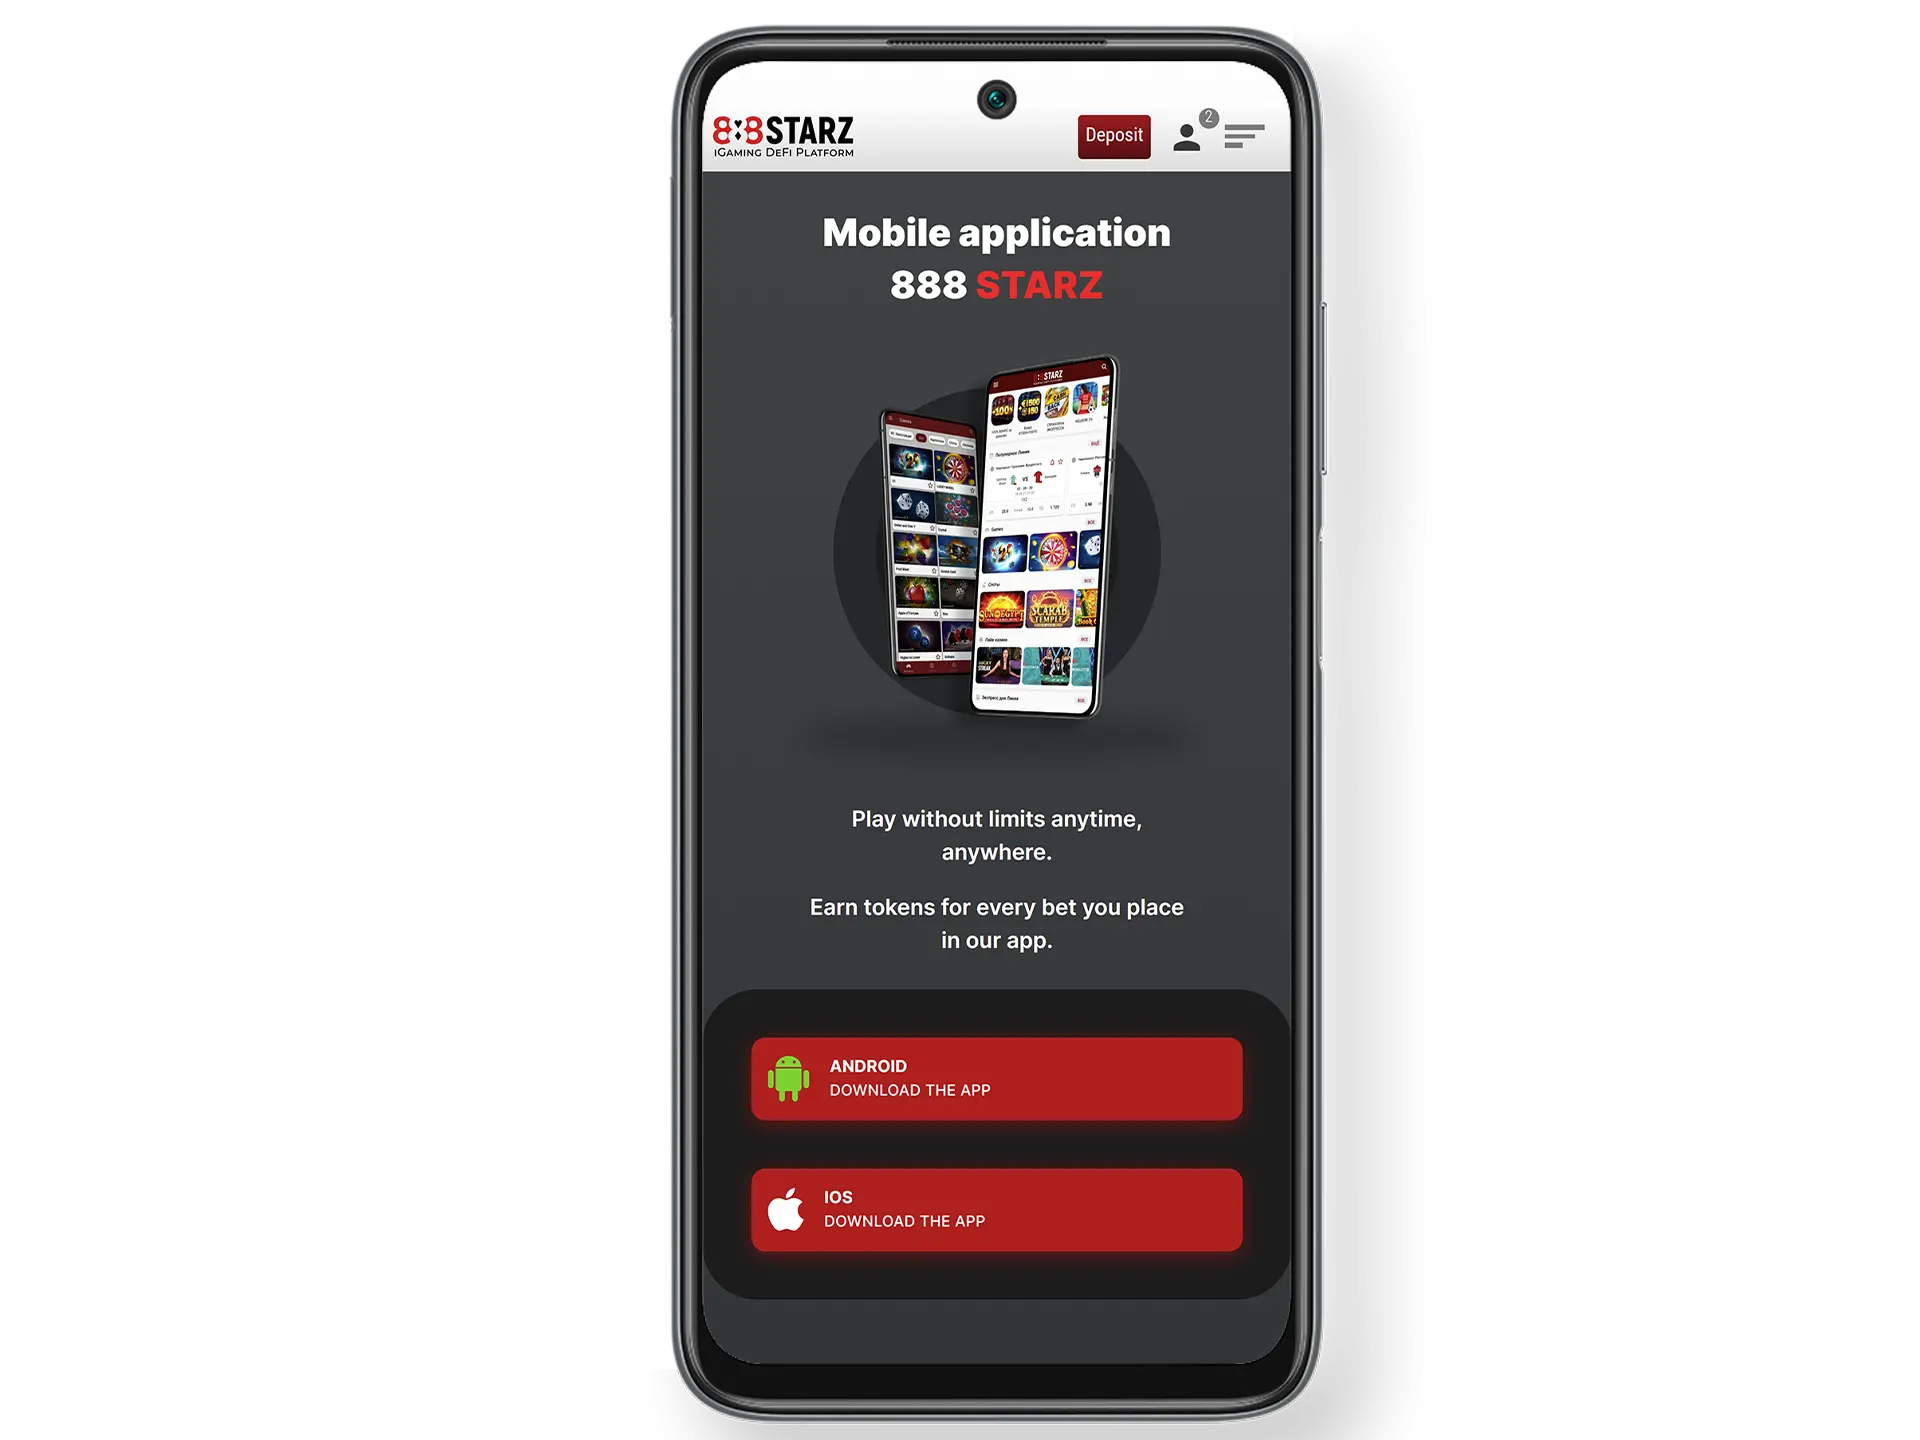 To get the mobile 888starz app on your smartphone, just download the apk file and follow the instructions.